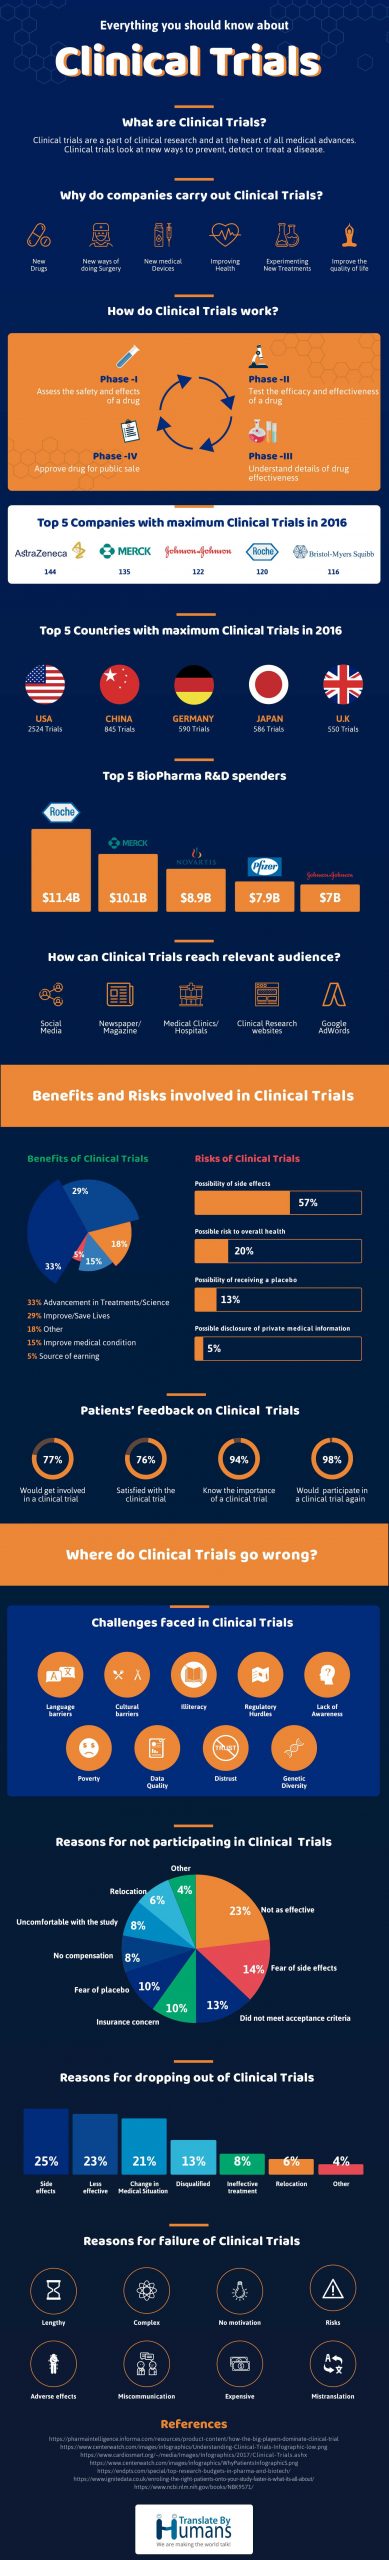 Infographic_Clinical_Trials